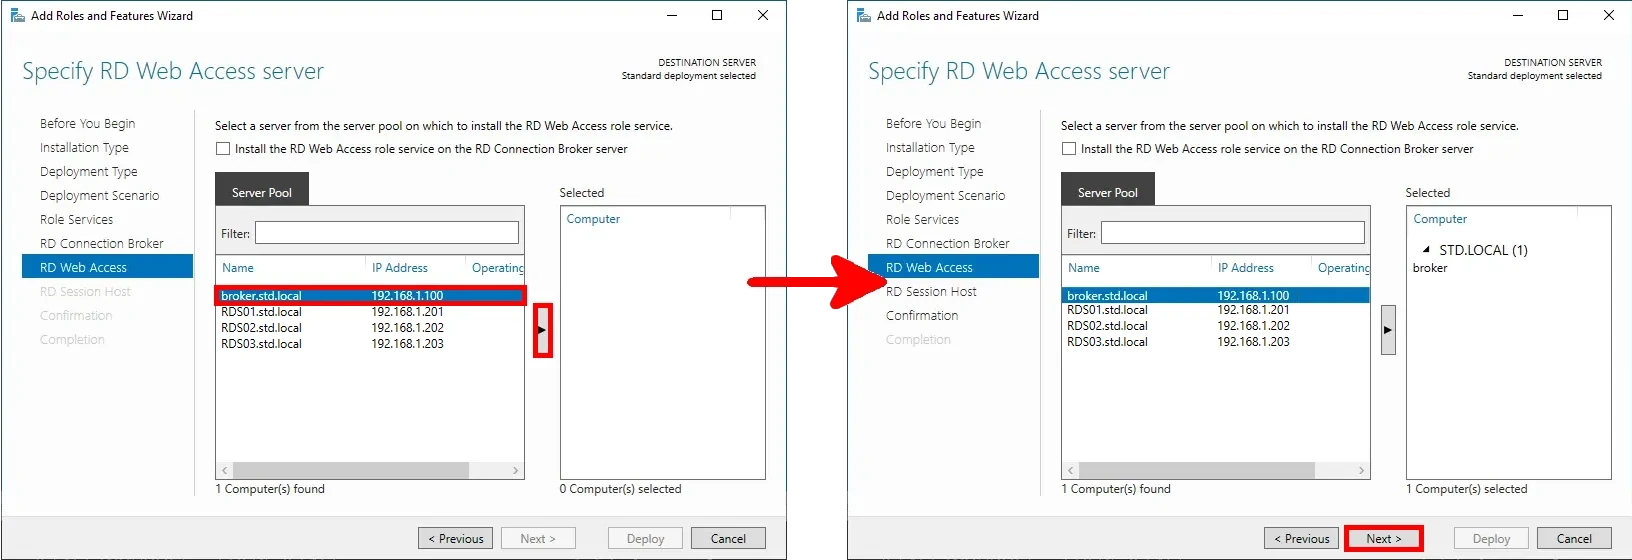 Step Specify a Remote Desktop Services Web Access Server from the Windows Role and Feature Wizard window